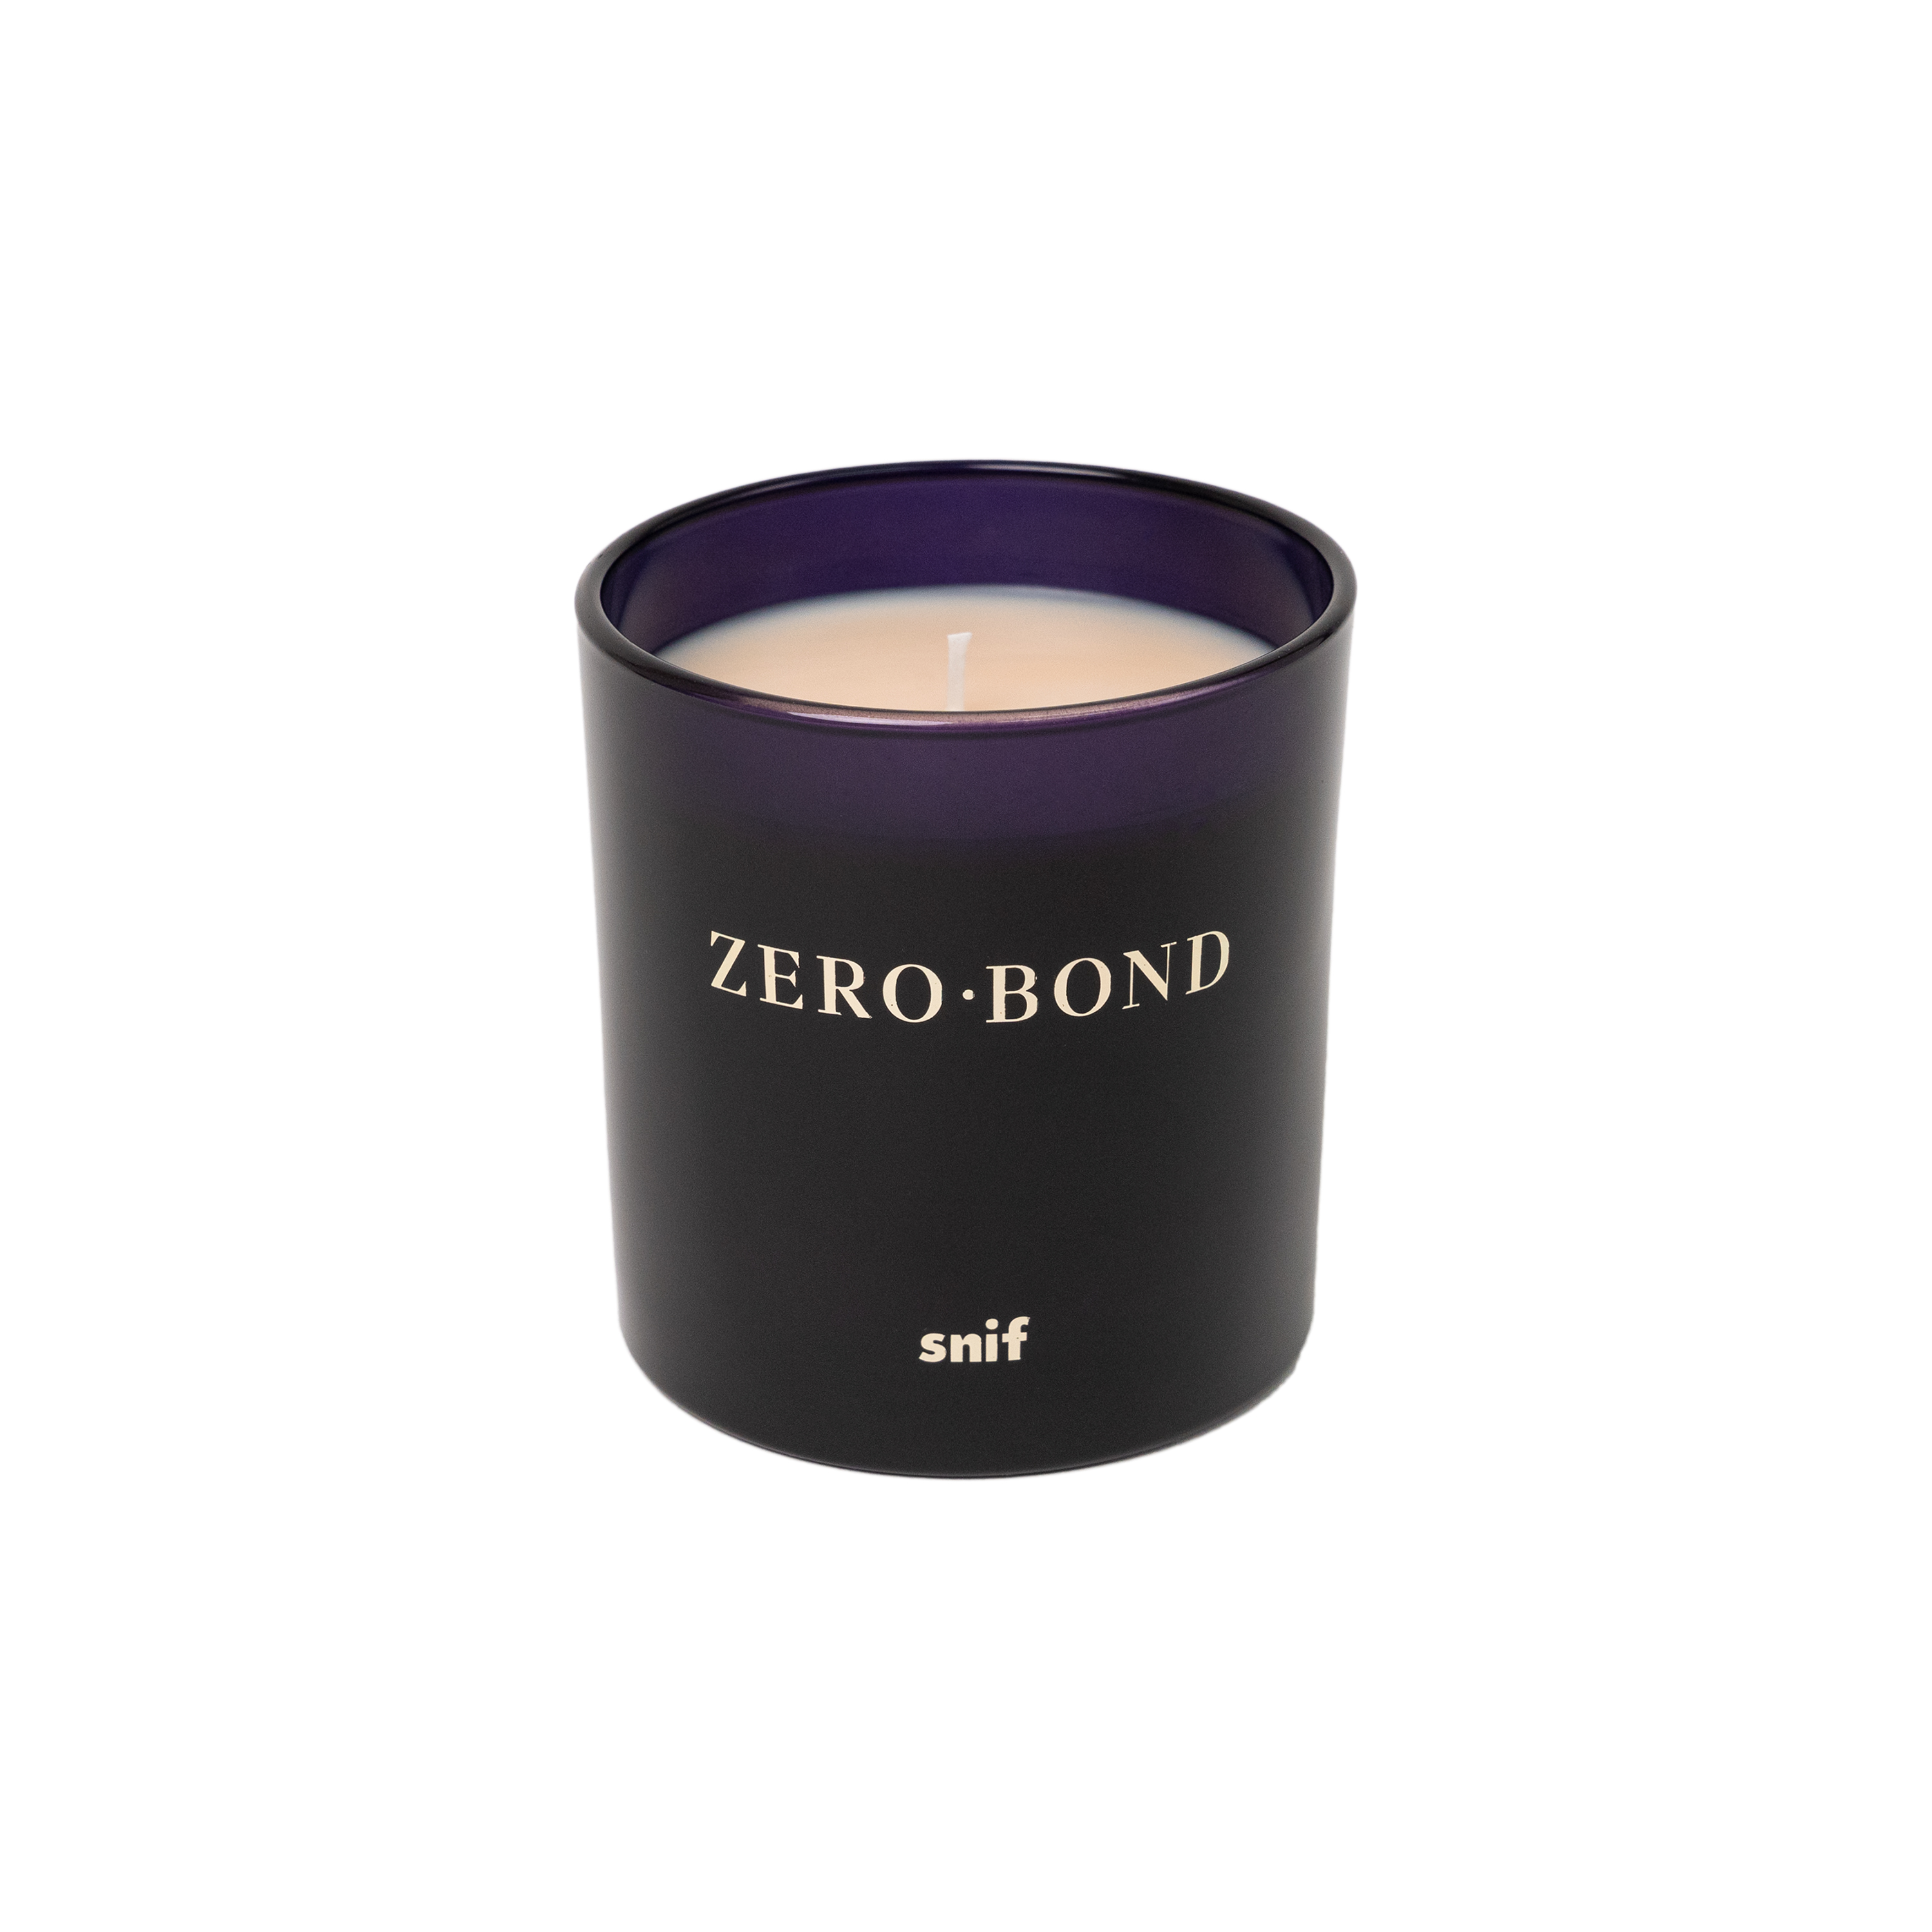 Zero Bond "Invite Only" Candle by snif